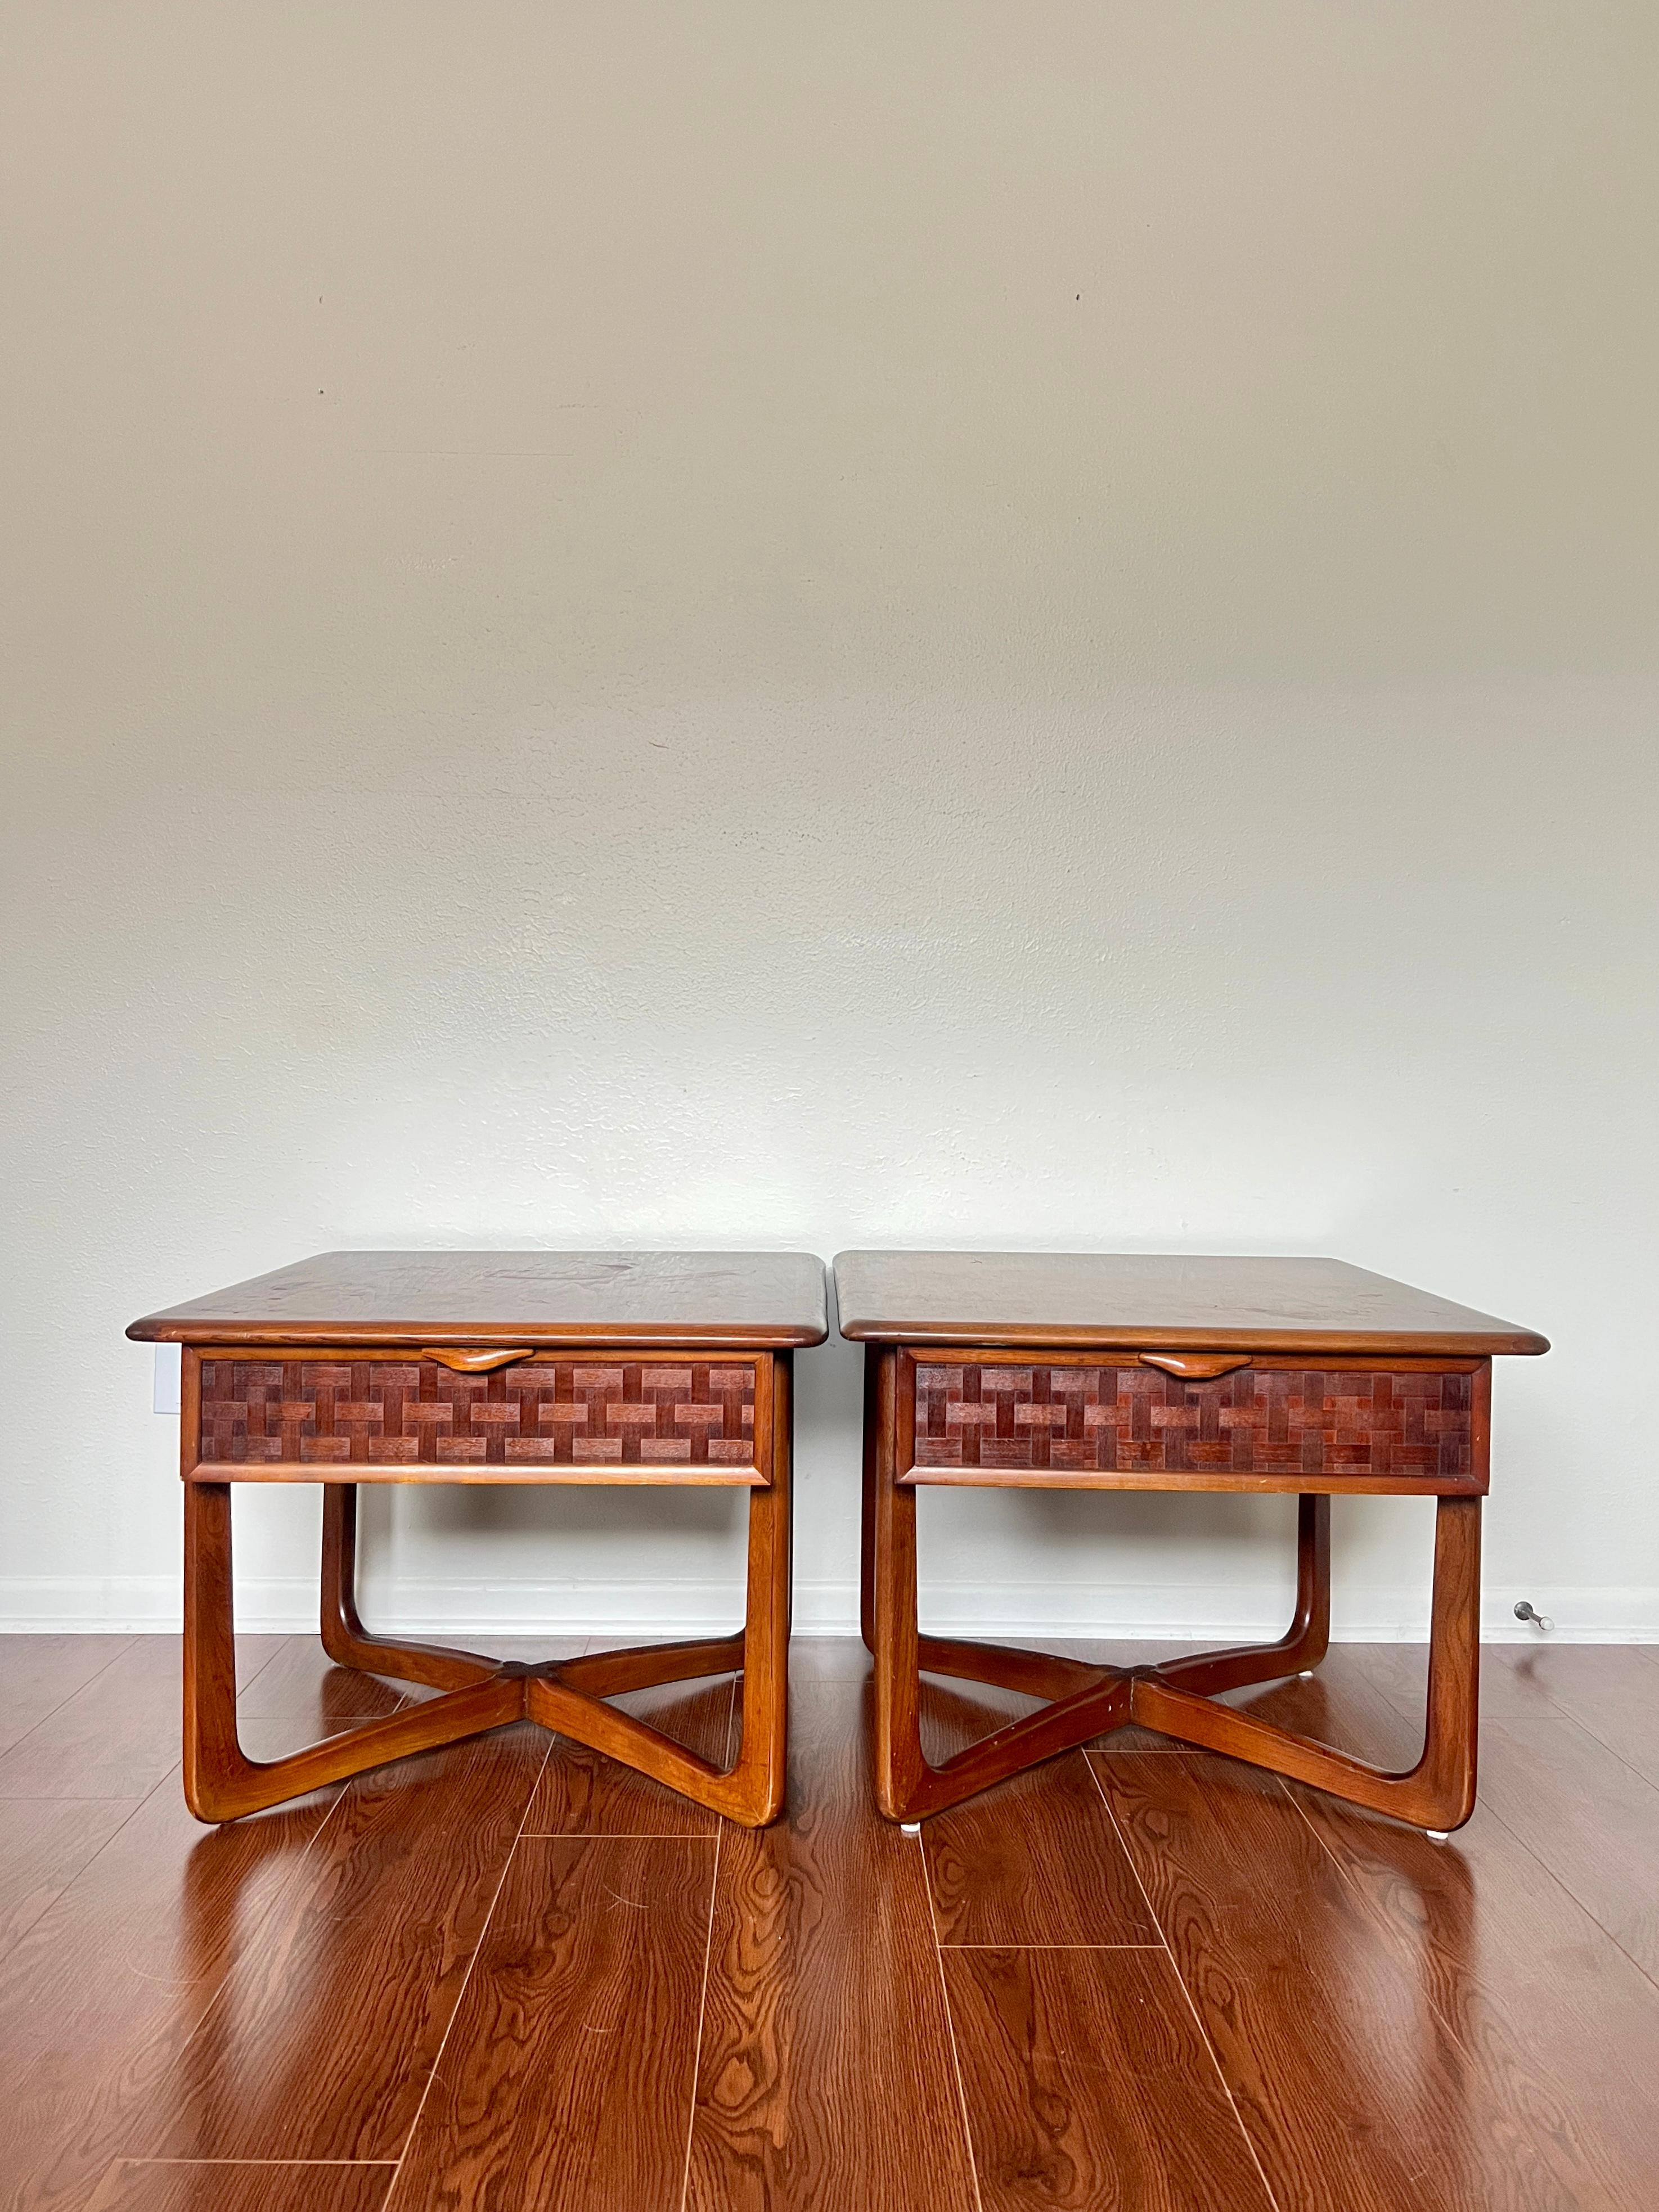 Pair of Mid-Century Modern Lane Perception Side Tables with a Cross Cross Base 9